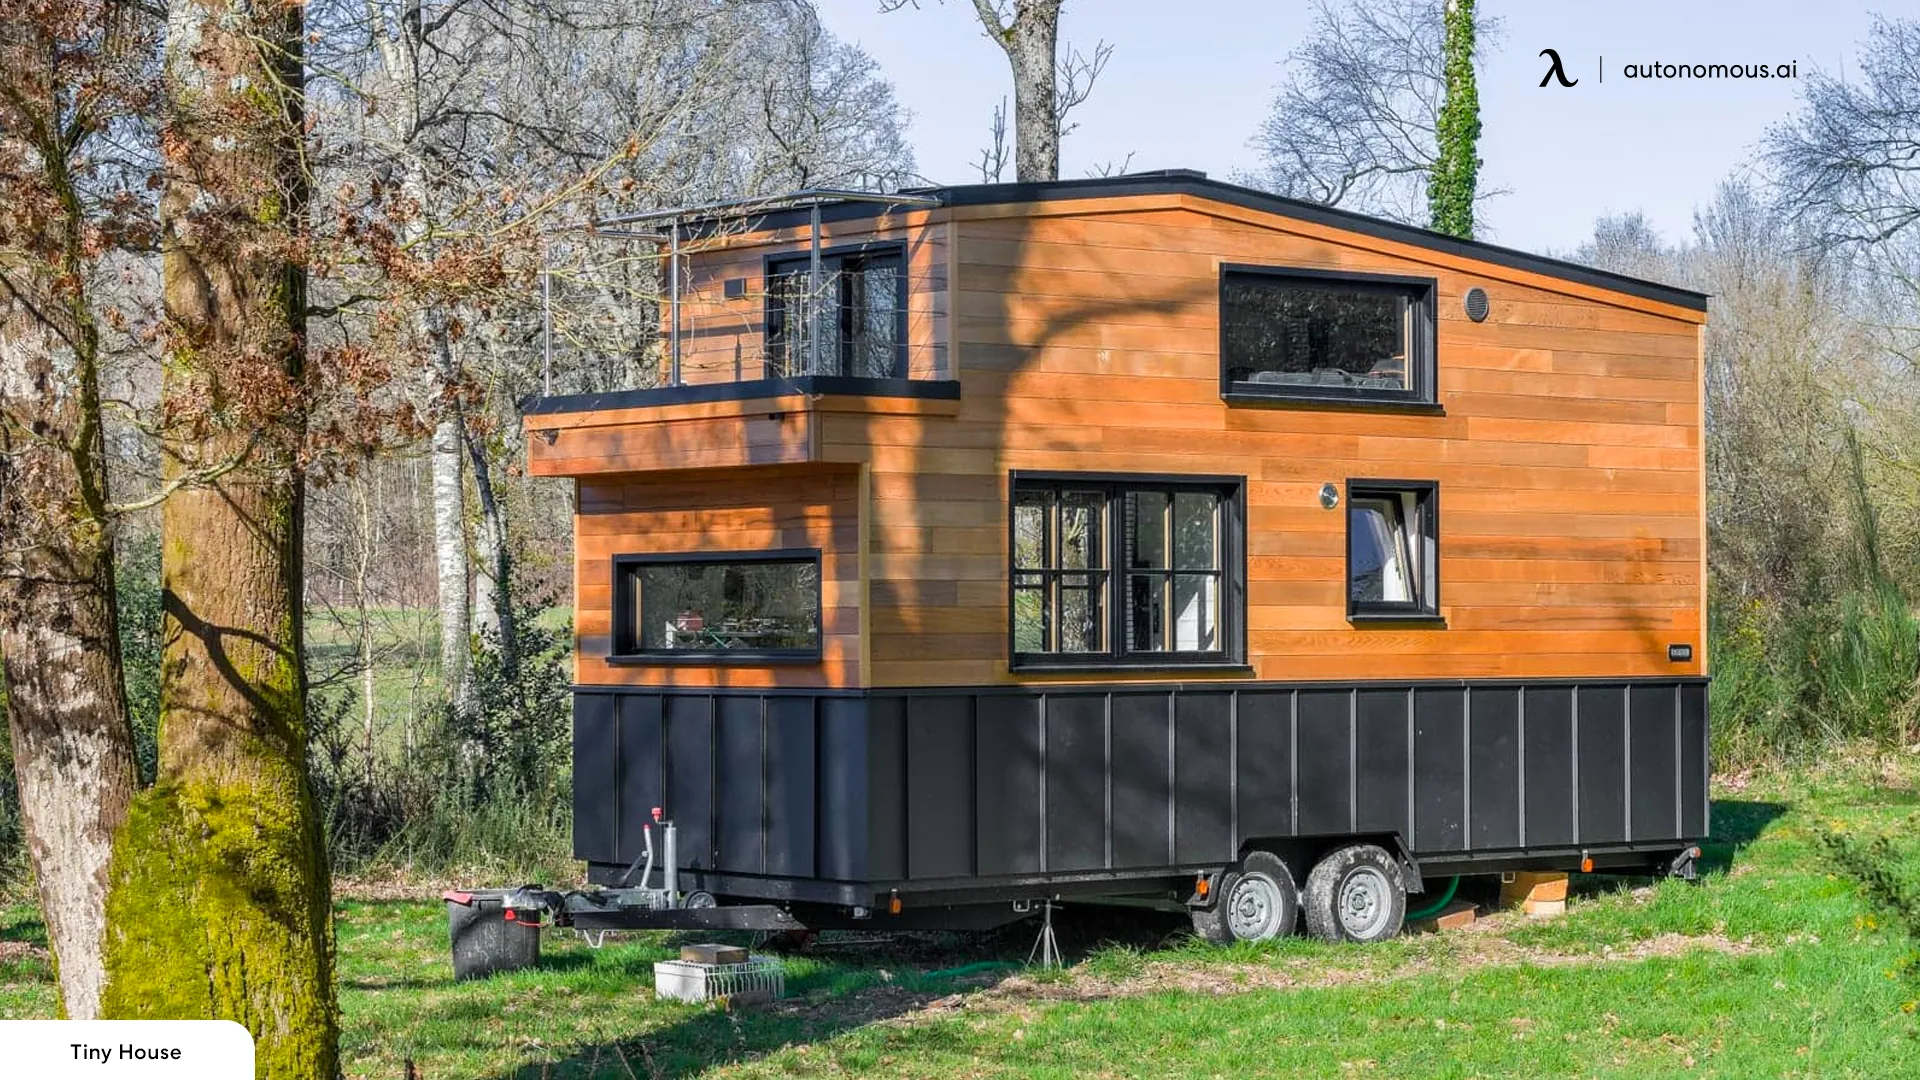 Permit Requirements for Tiny Homes